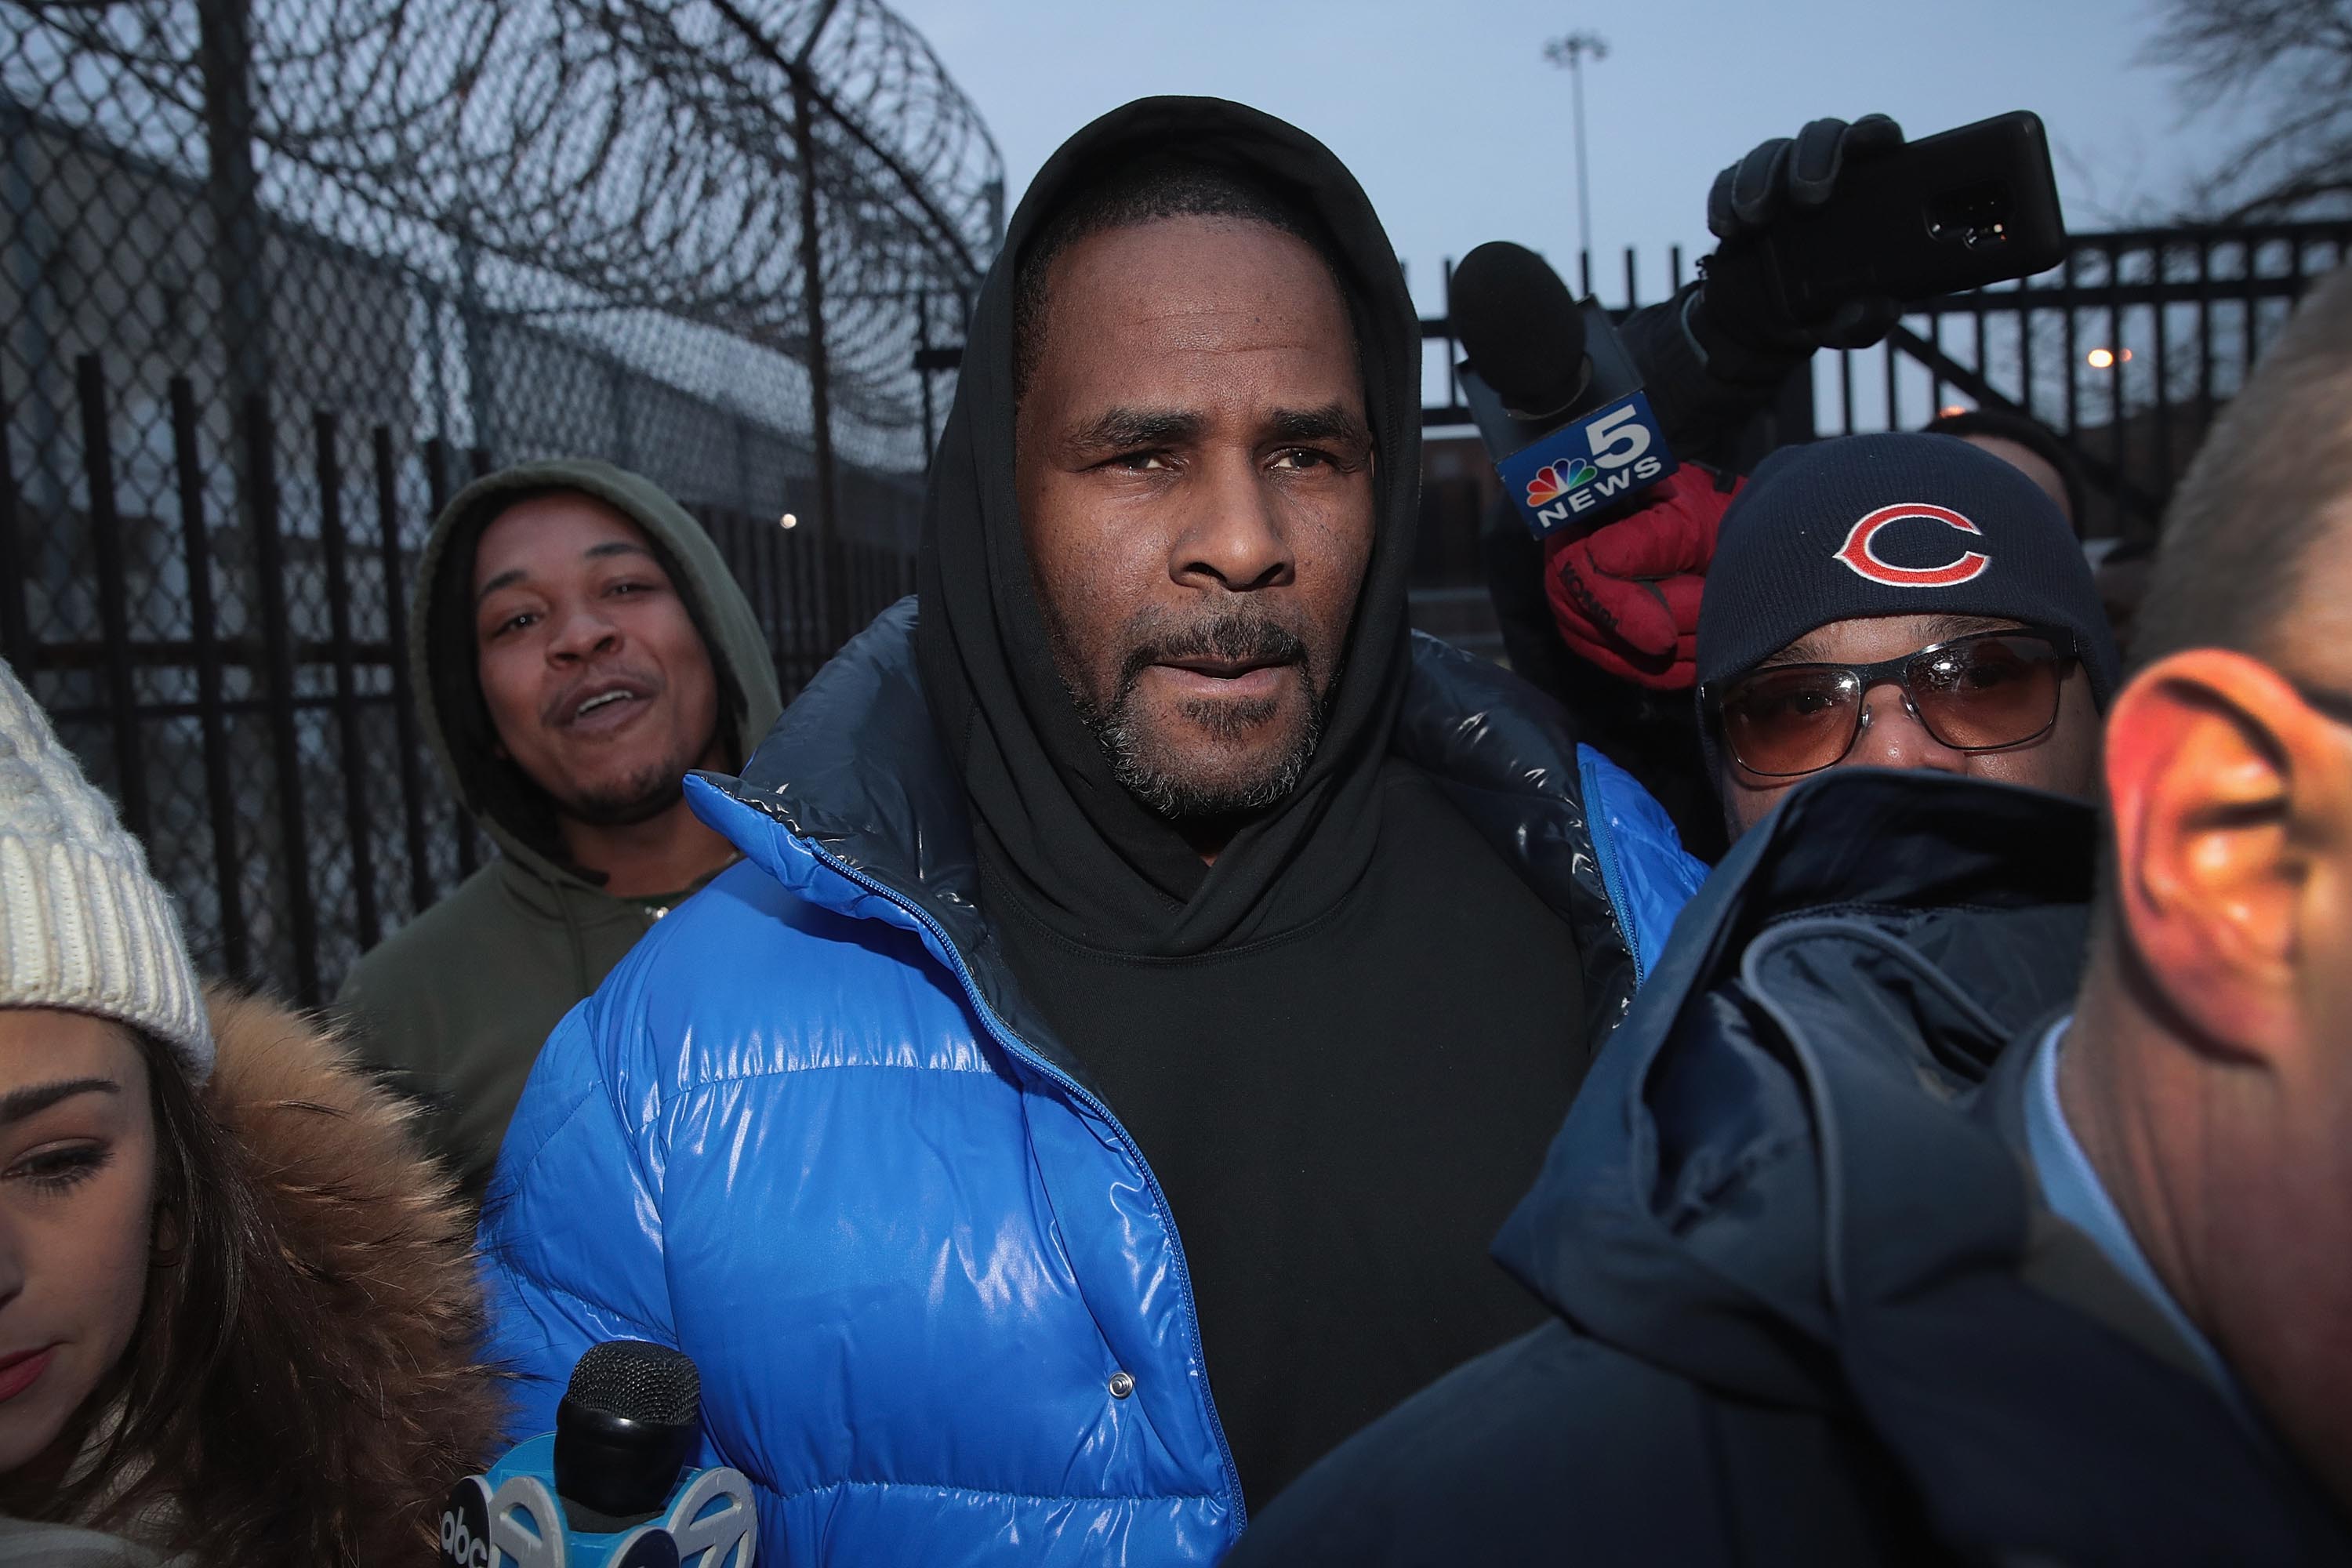 R. Kelly leaving the Cook County jail on Feb. 25, 2019 in Chicago, Illinois. | Photo: Getty Images